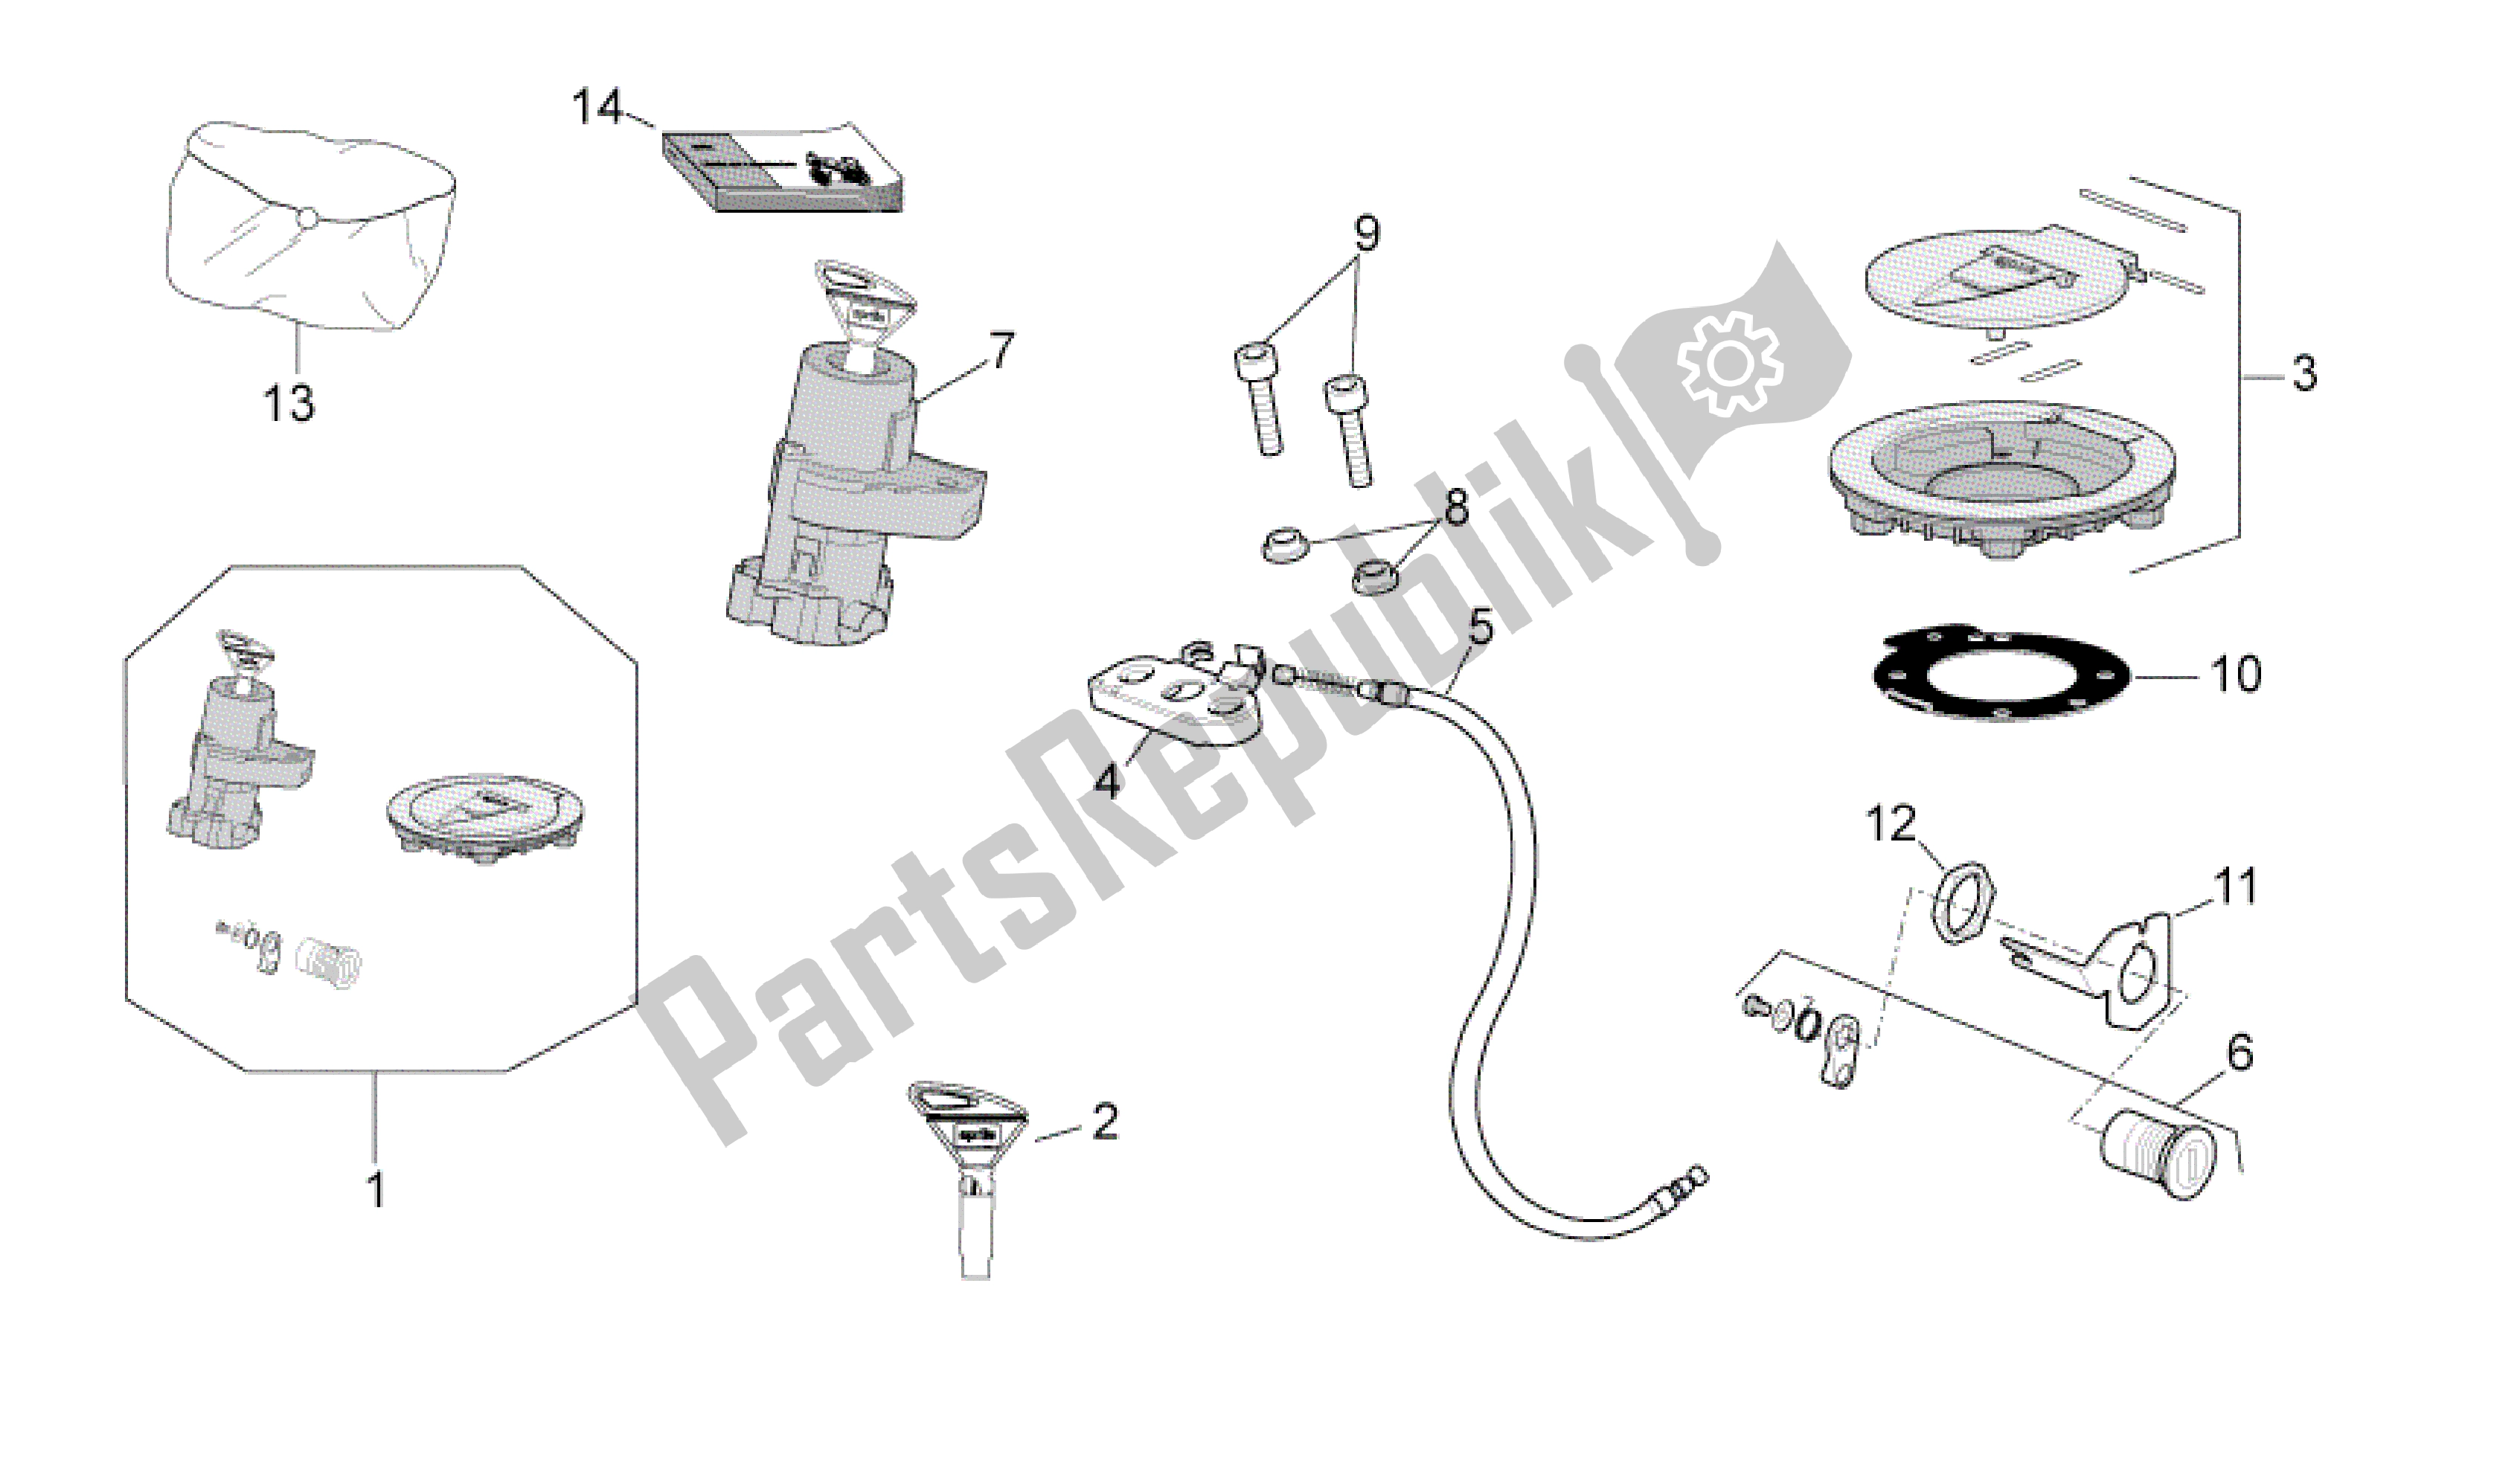 All parts for the Lock Hardware Kit of the Aprilia RSV4 Aprc Factory 3981 1000 2011 - 2012